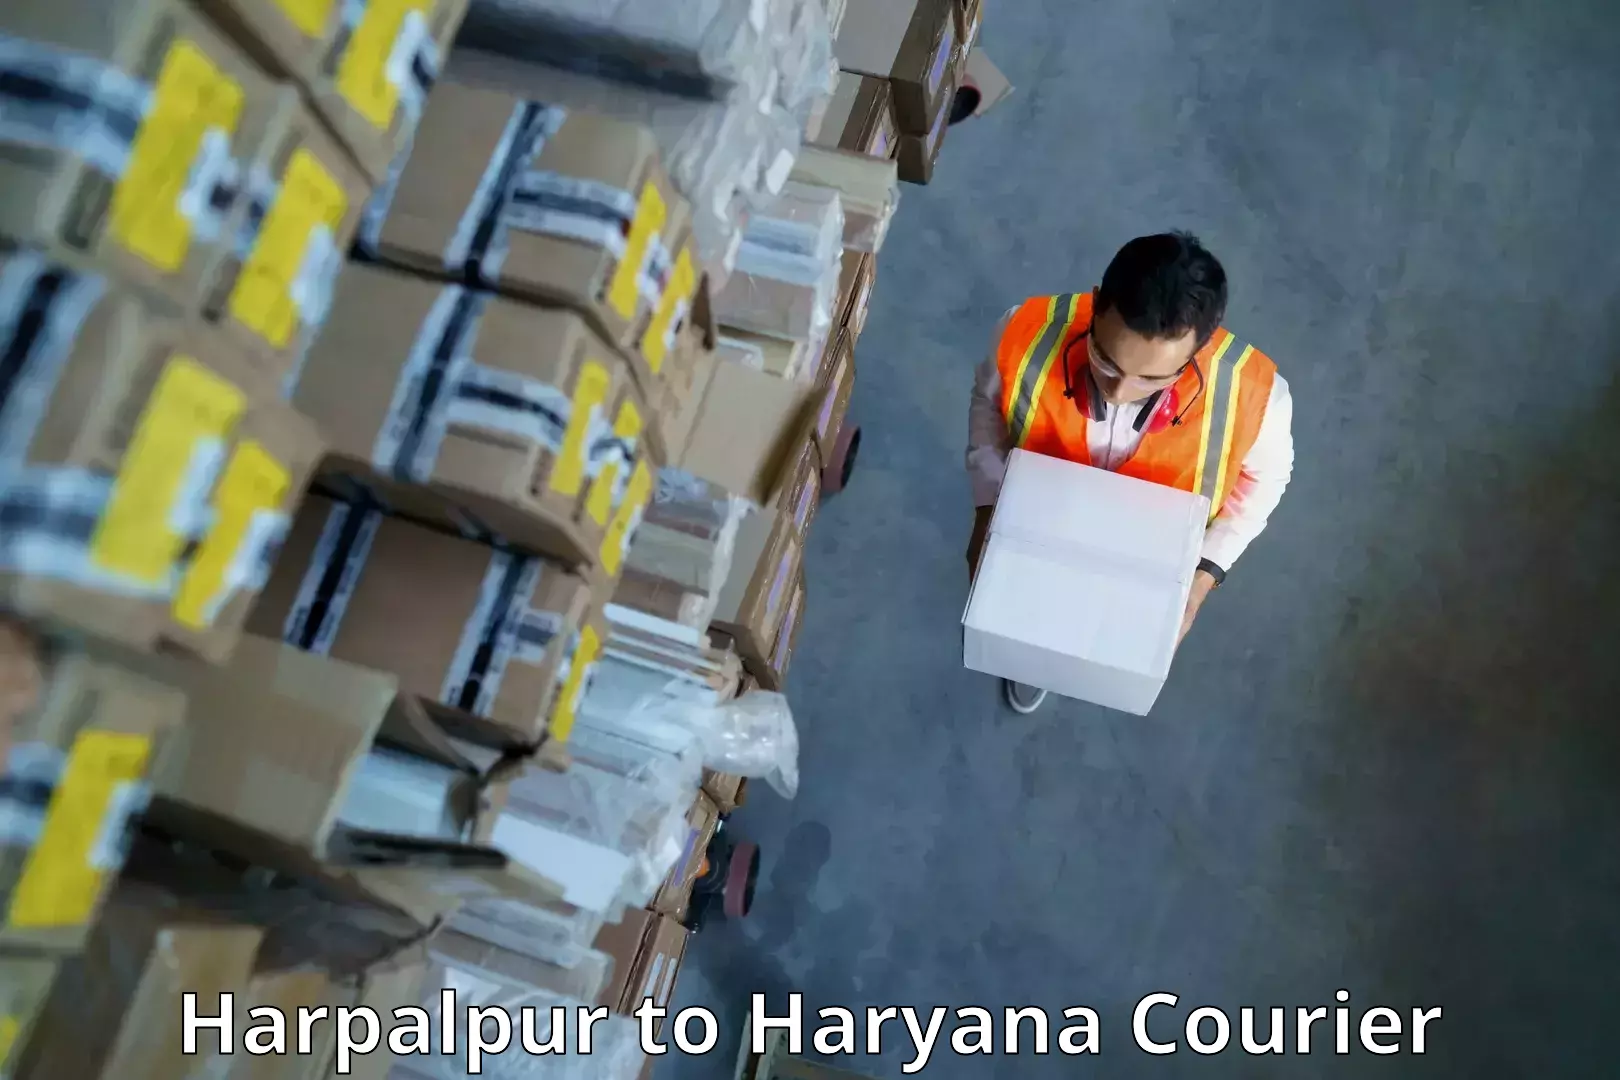 Reliable delivery network Harpalpur to Julana